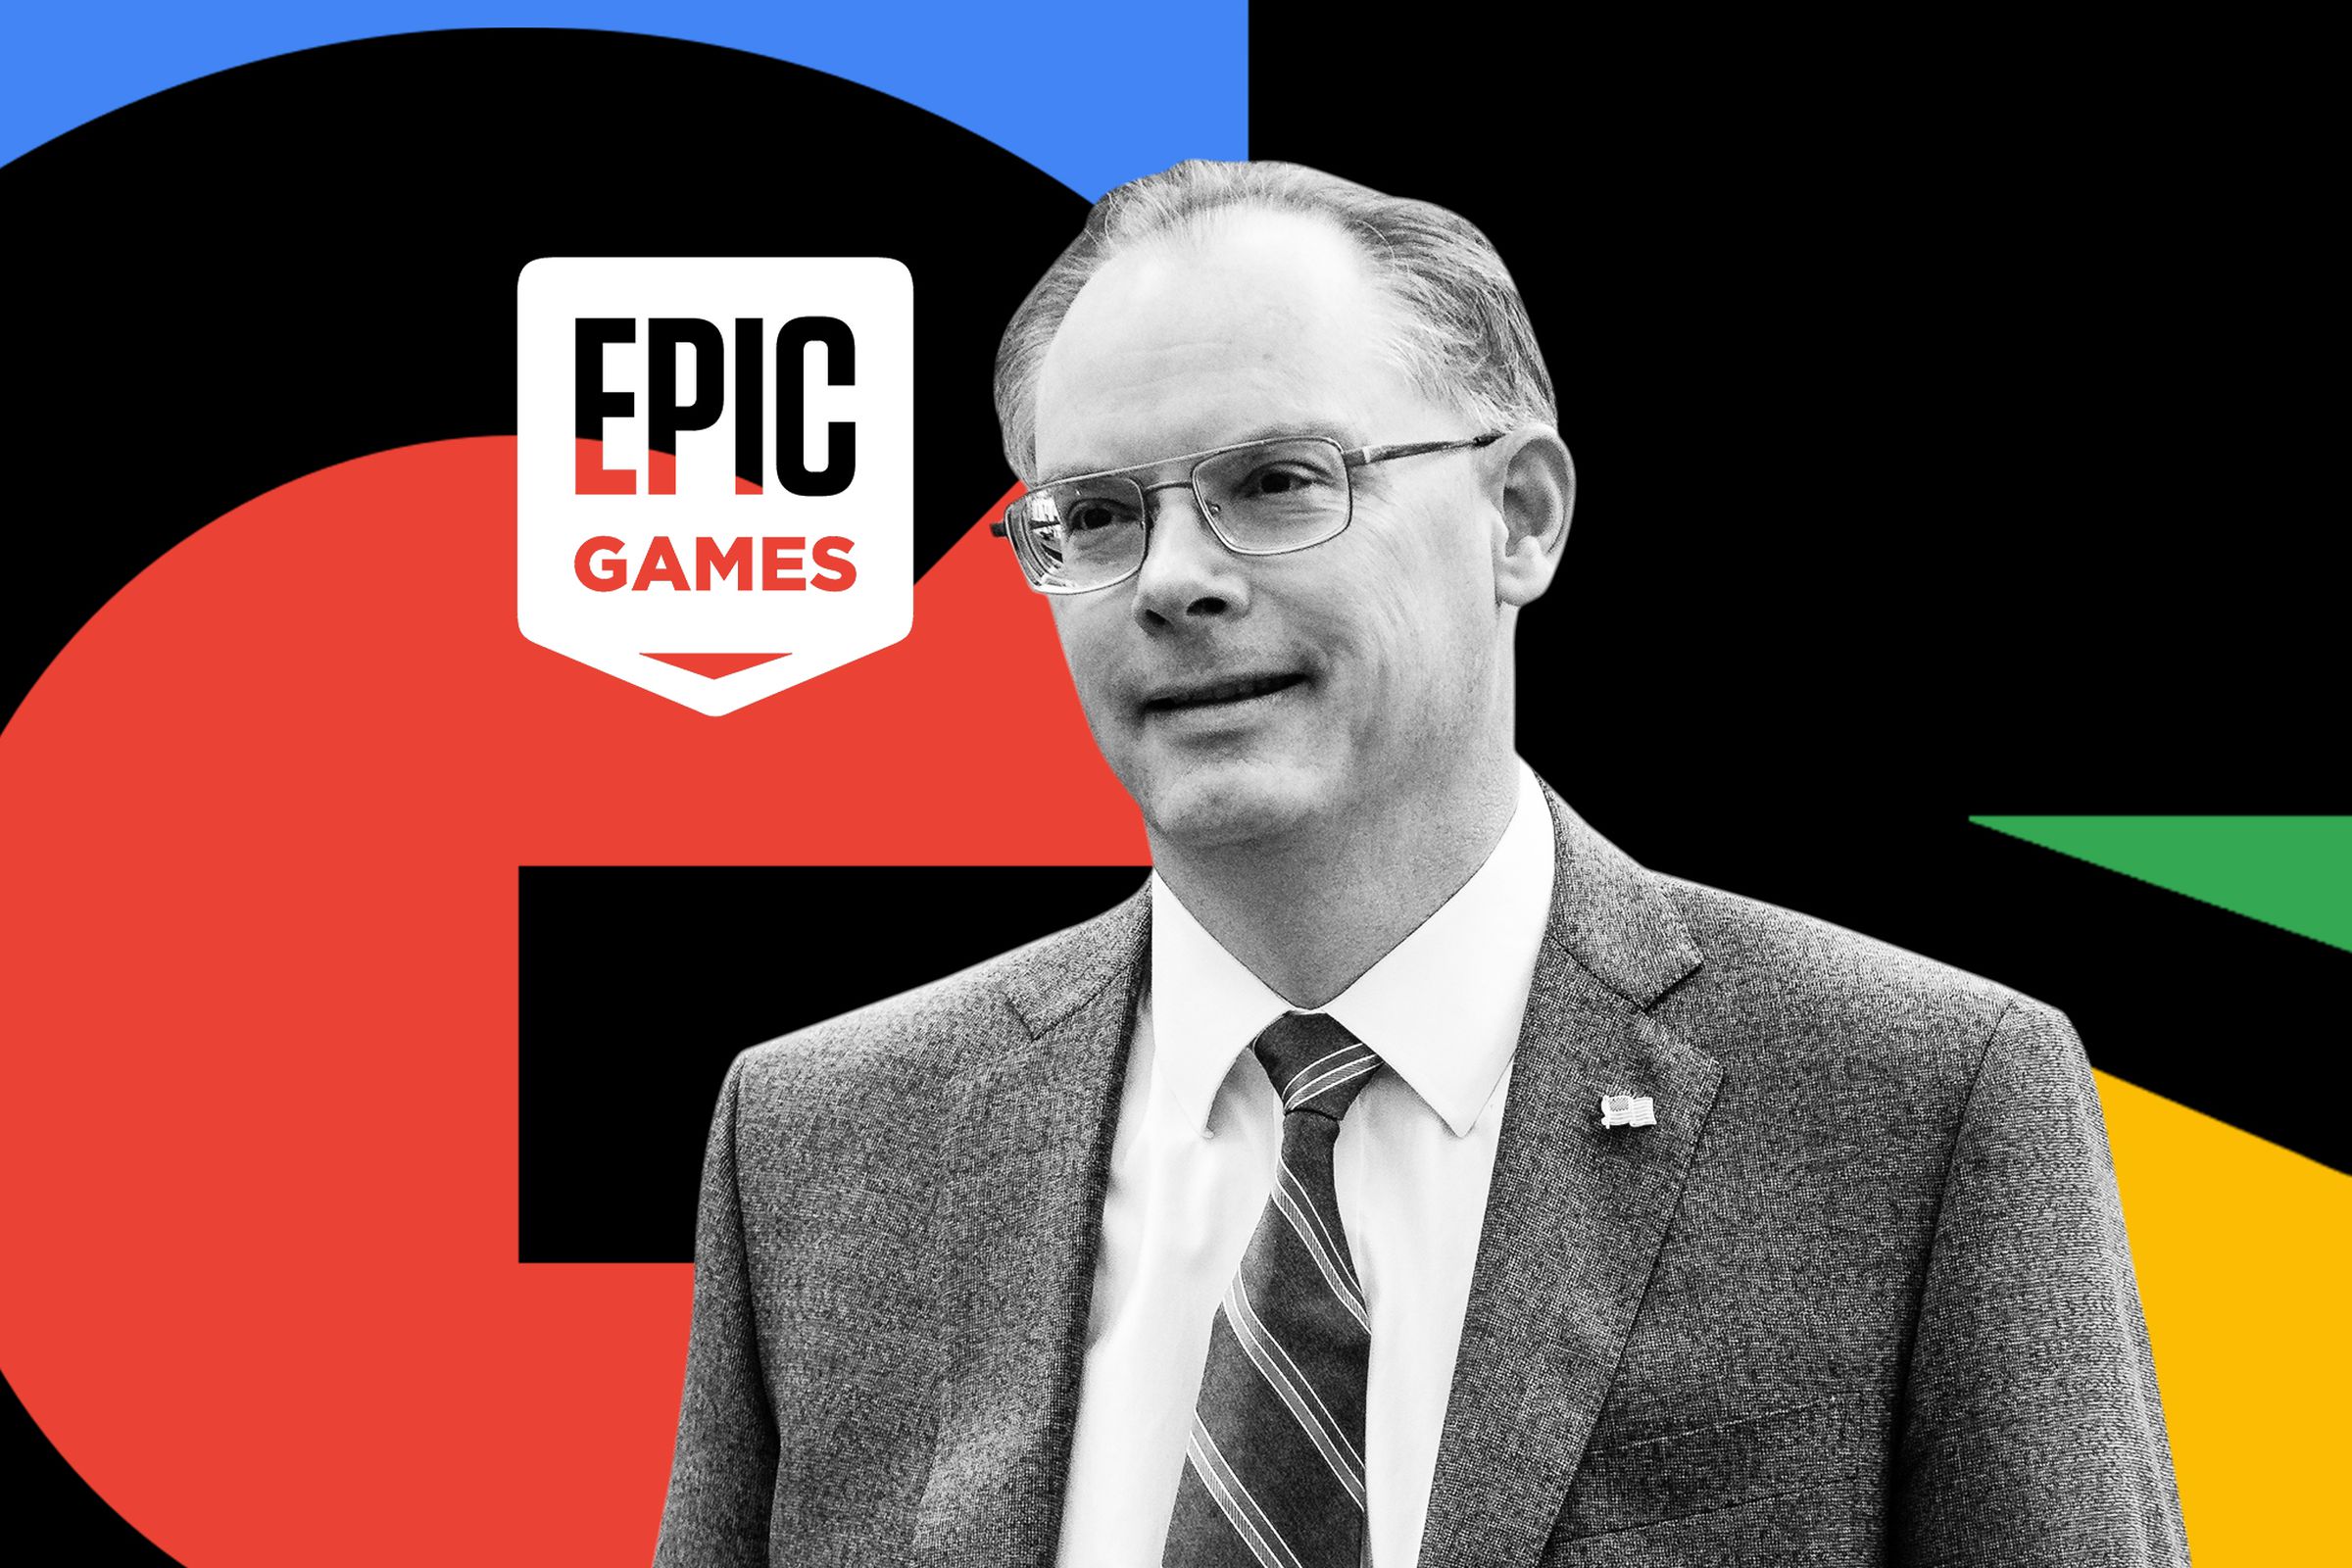 Photo illustration of Tim Sweeney in front of Google and Epic logos.